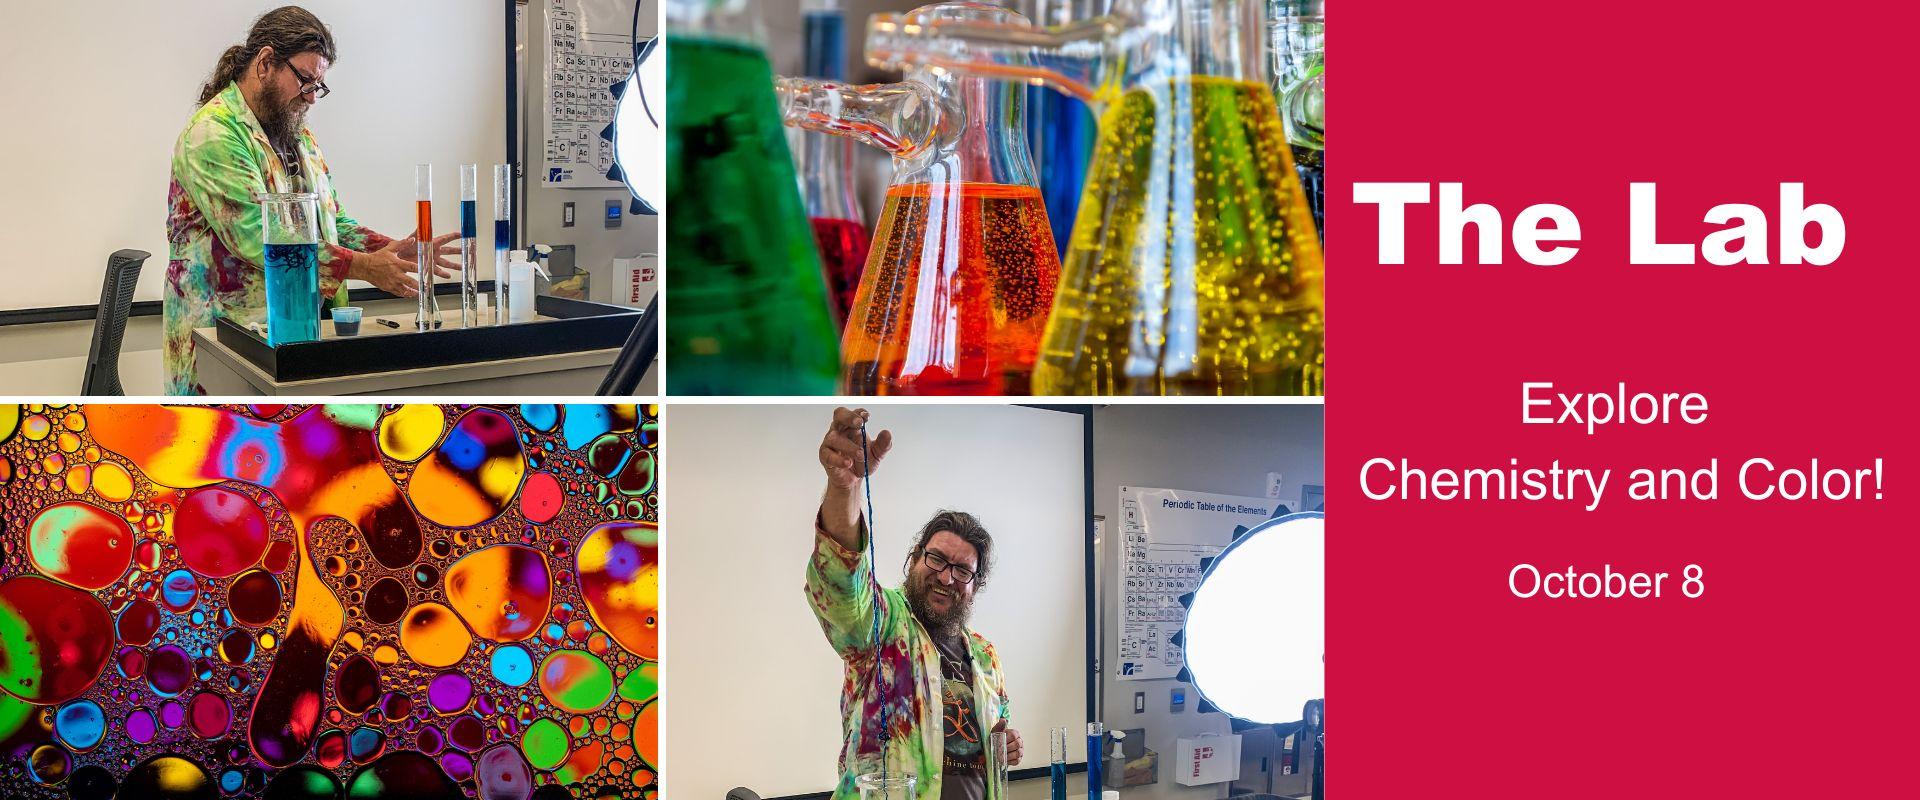 This photo shows colorful images of chemistry with liquids, viles, and Dr Graeme from Concordia